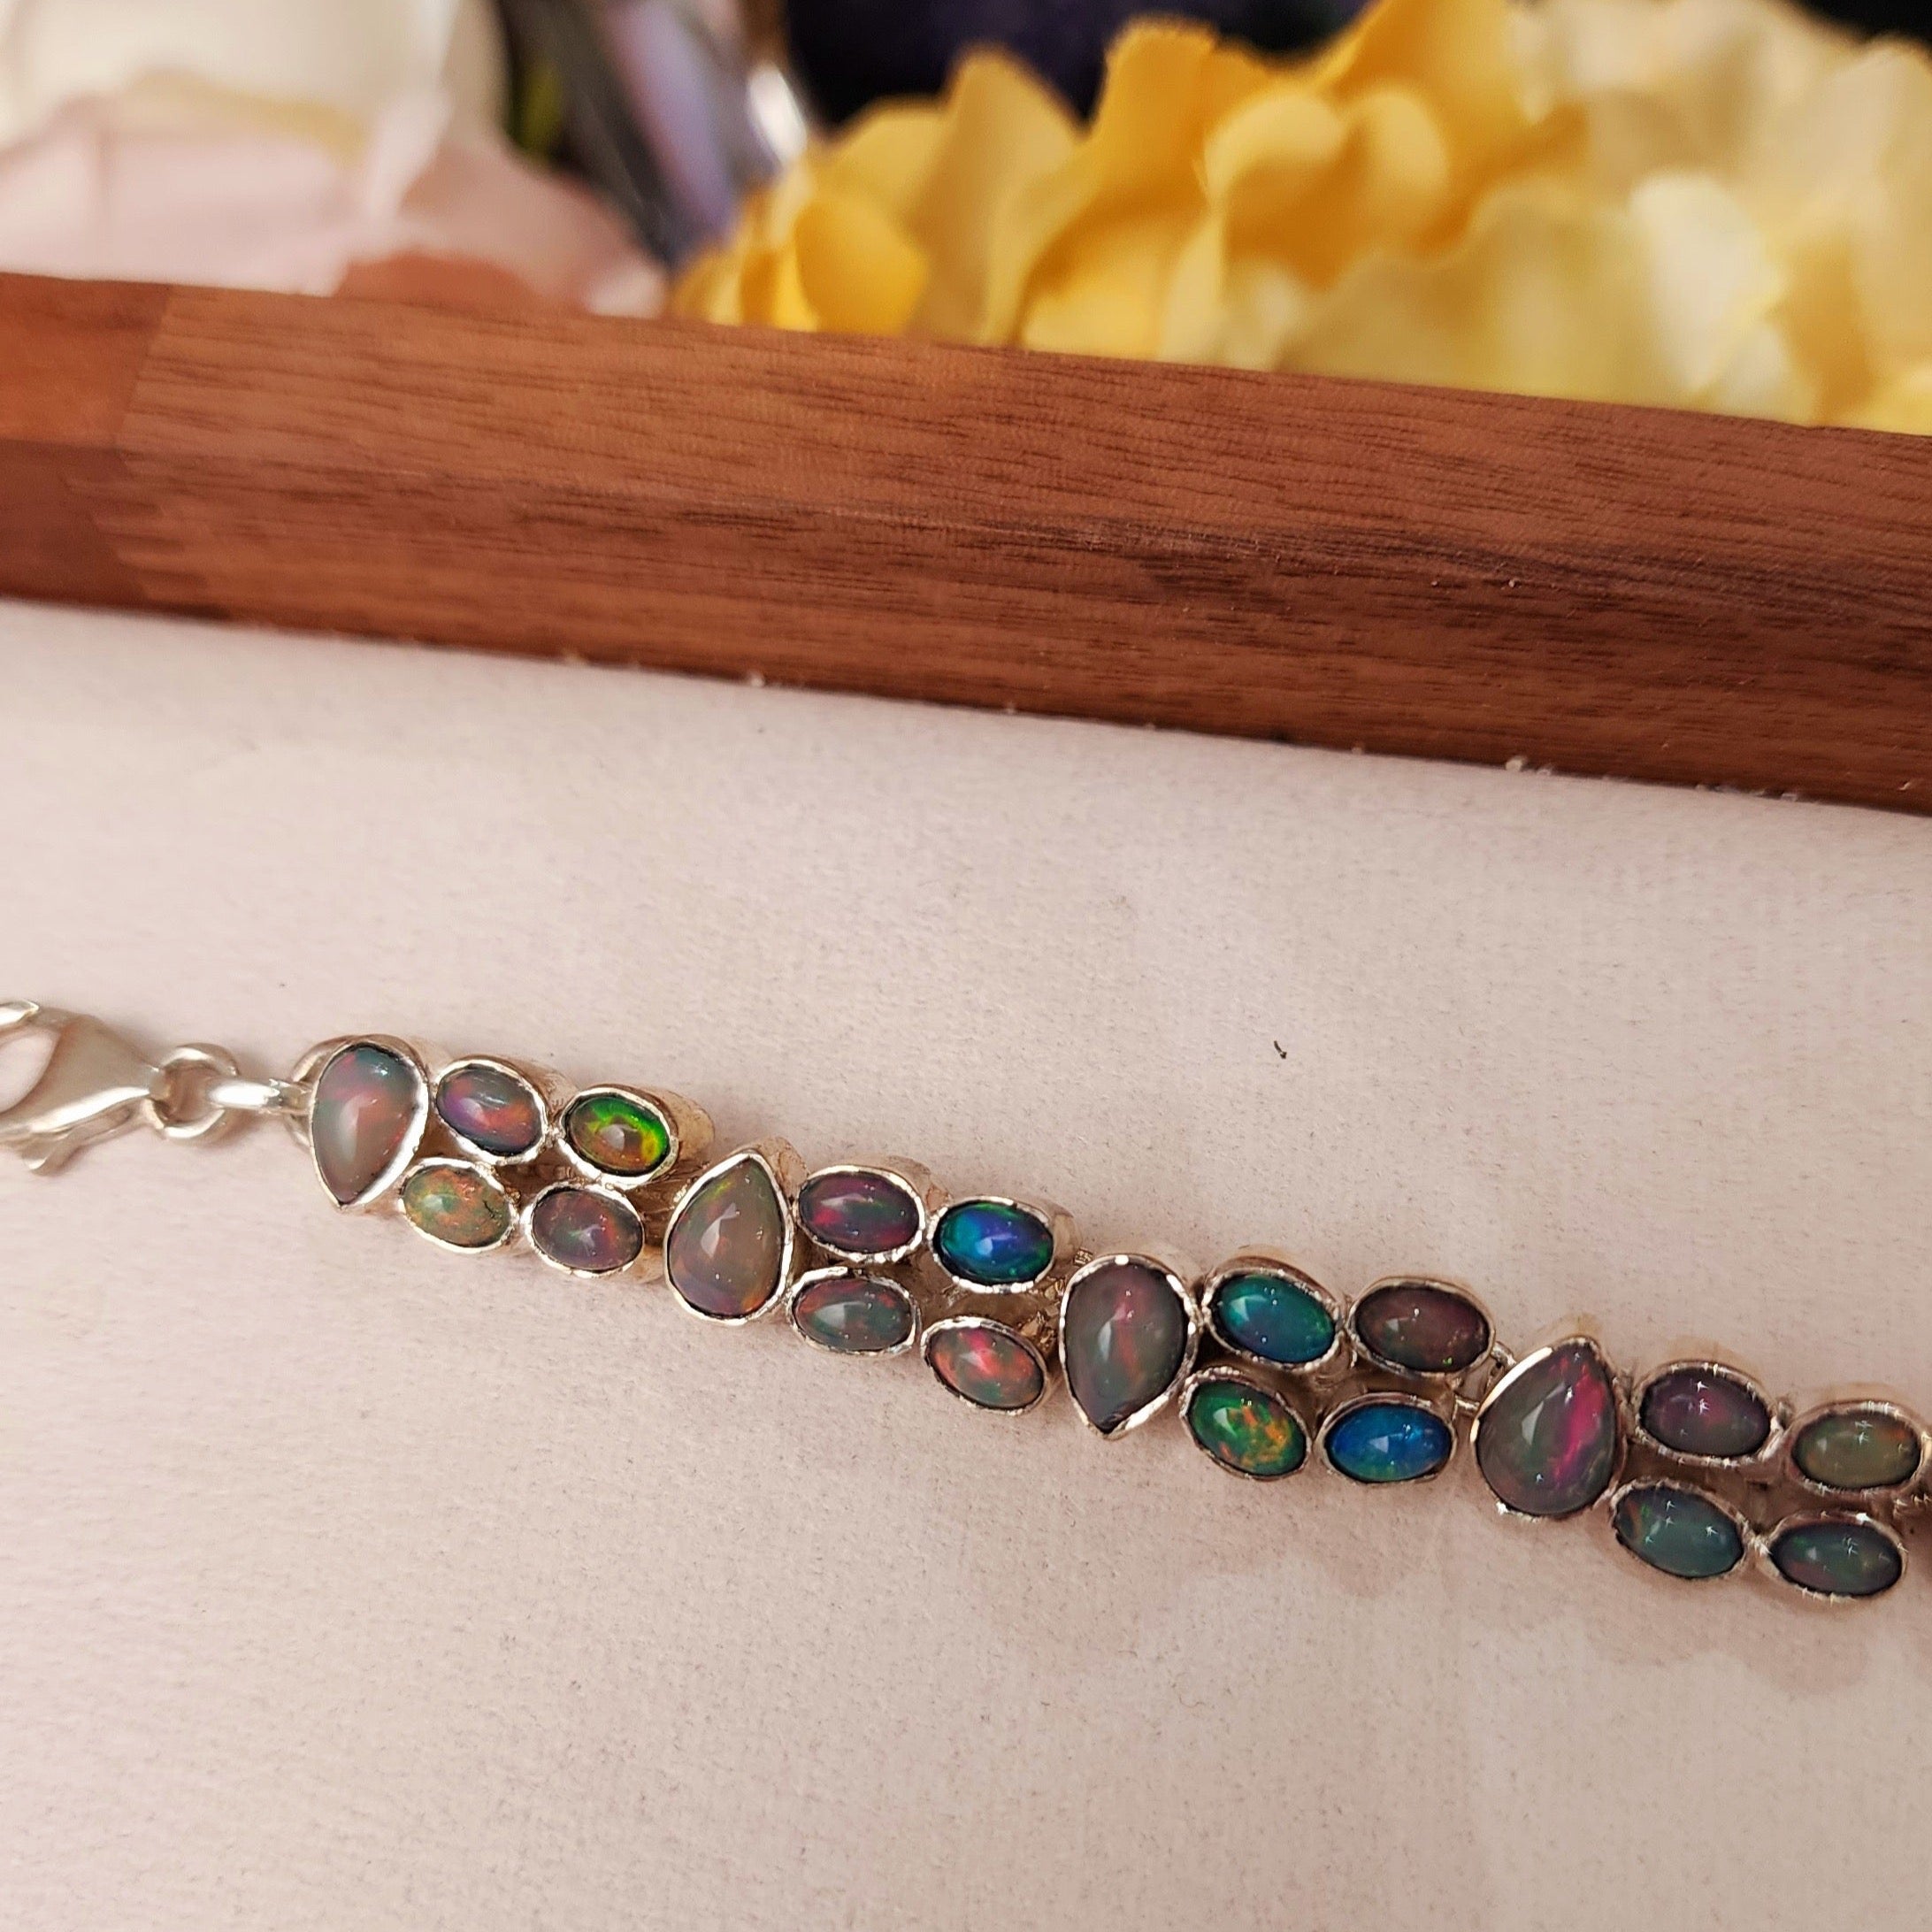 Ethiopian Opal .925 Silver Bracelet for Creativity, Joy and Self Discovery